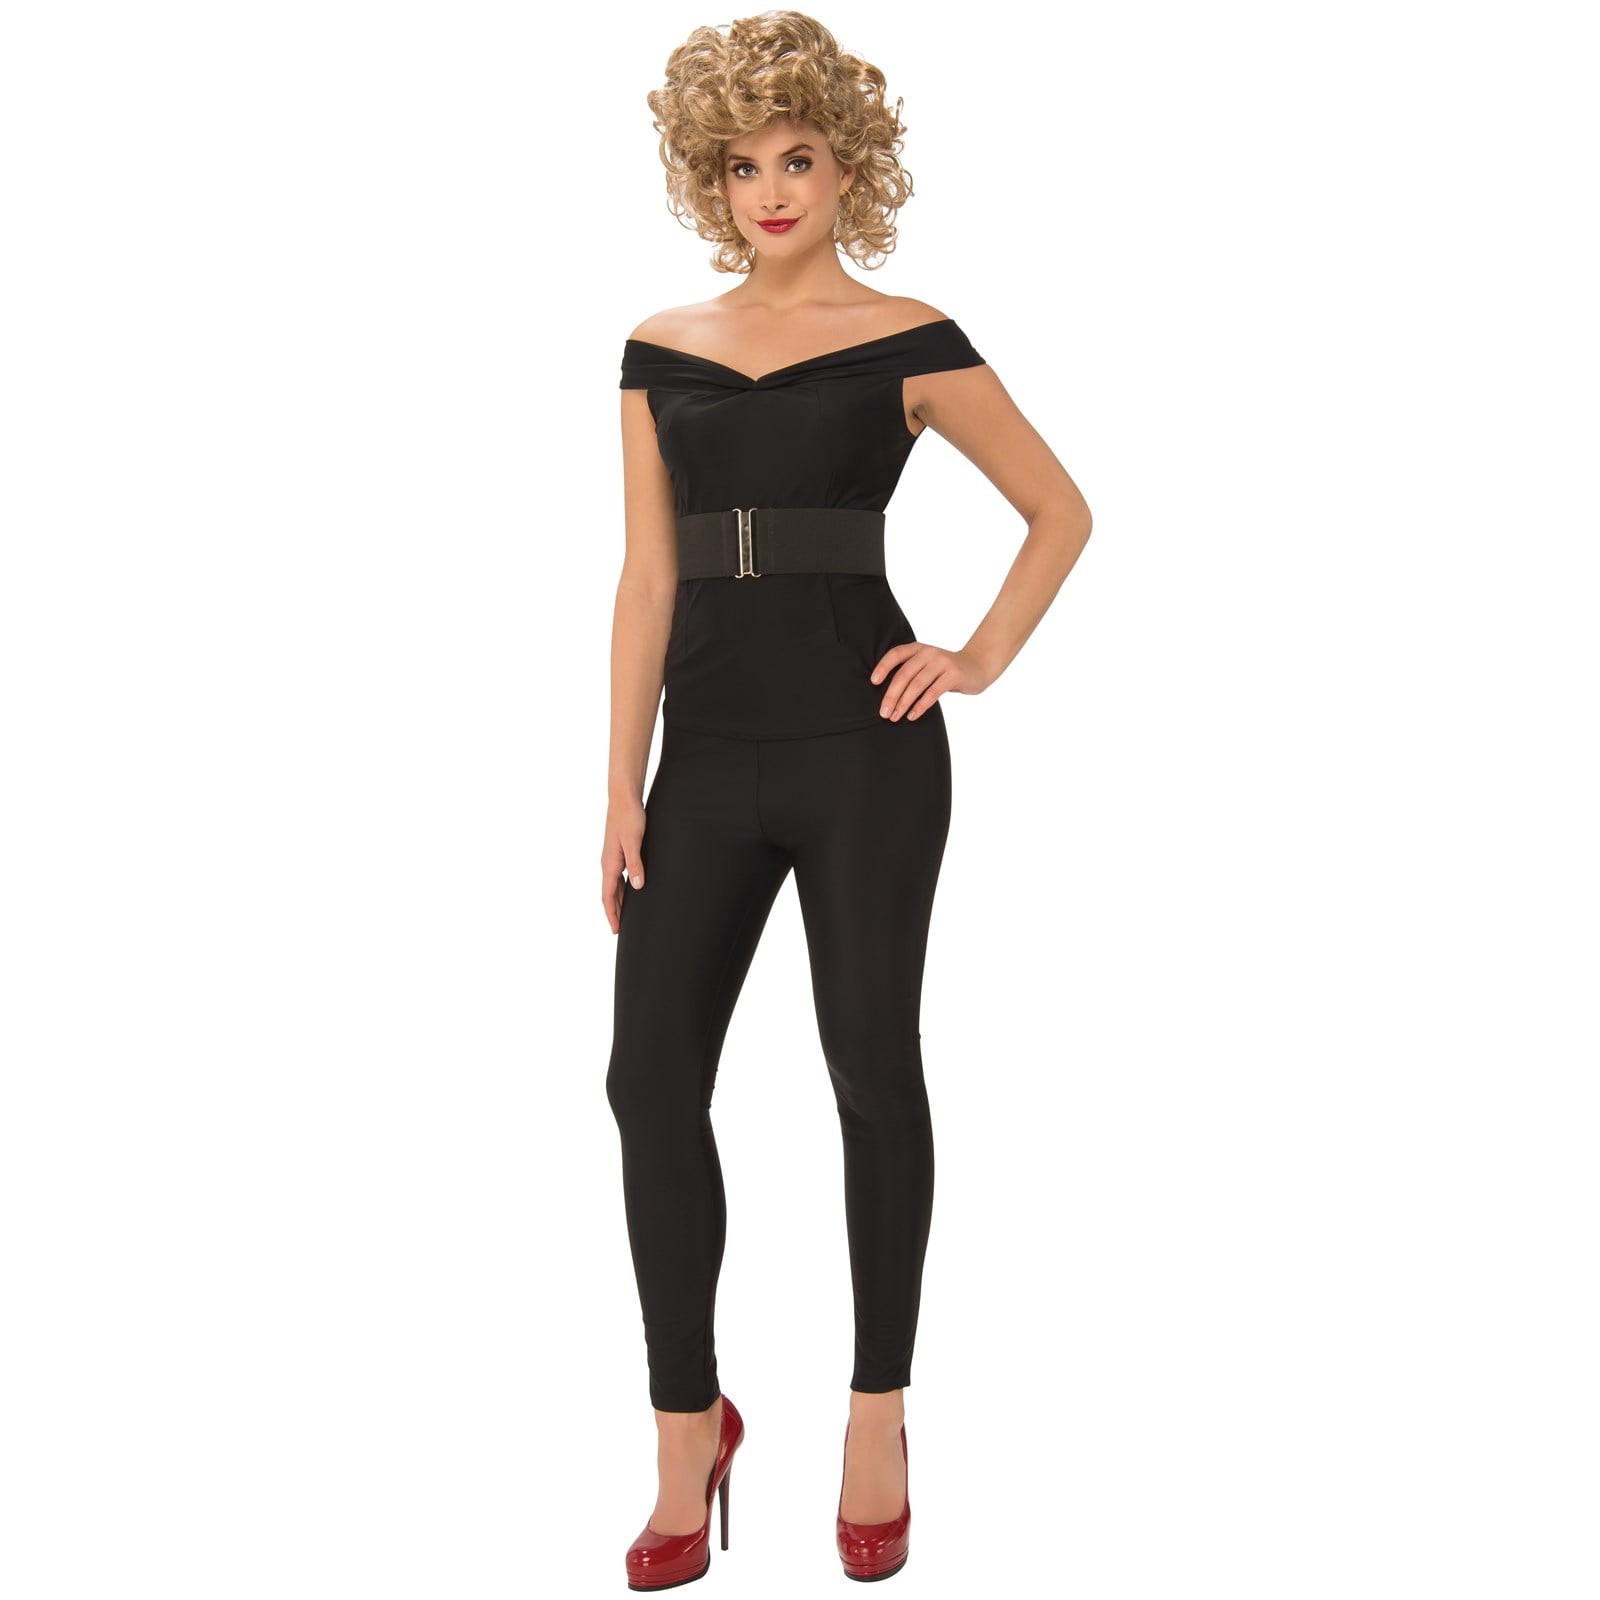 Decades Grease Bad Sandy Fancy-Dress Costume for Adult, One Size - Walmart.com